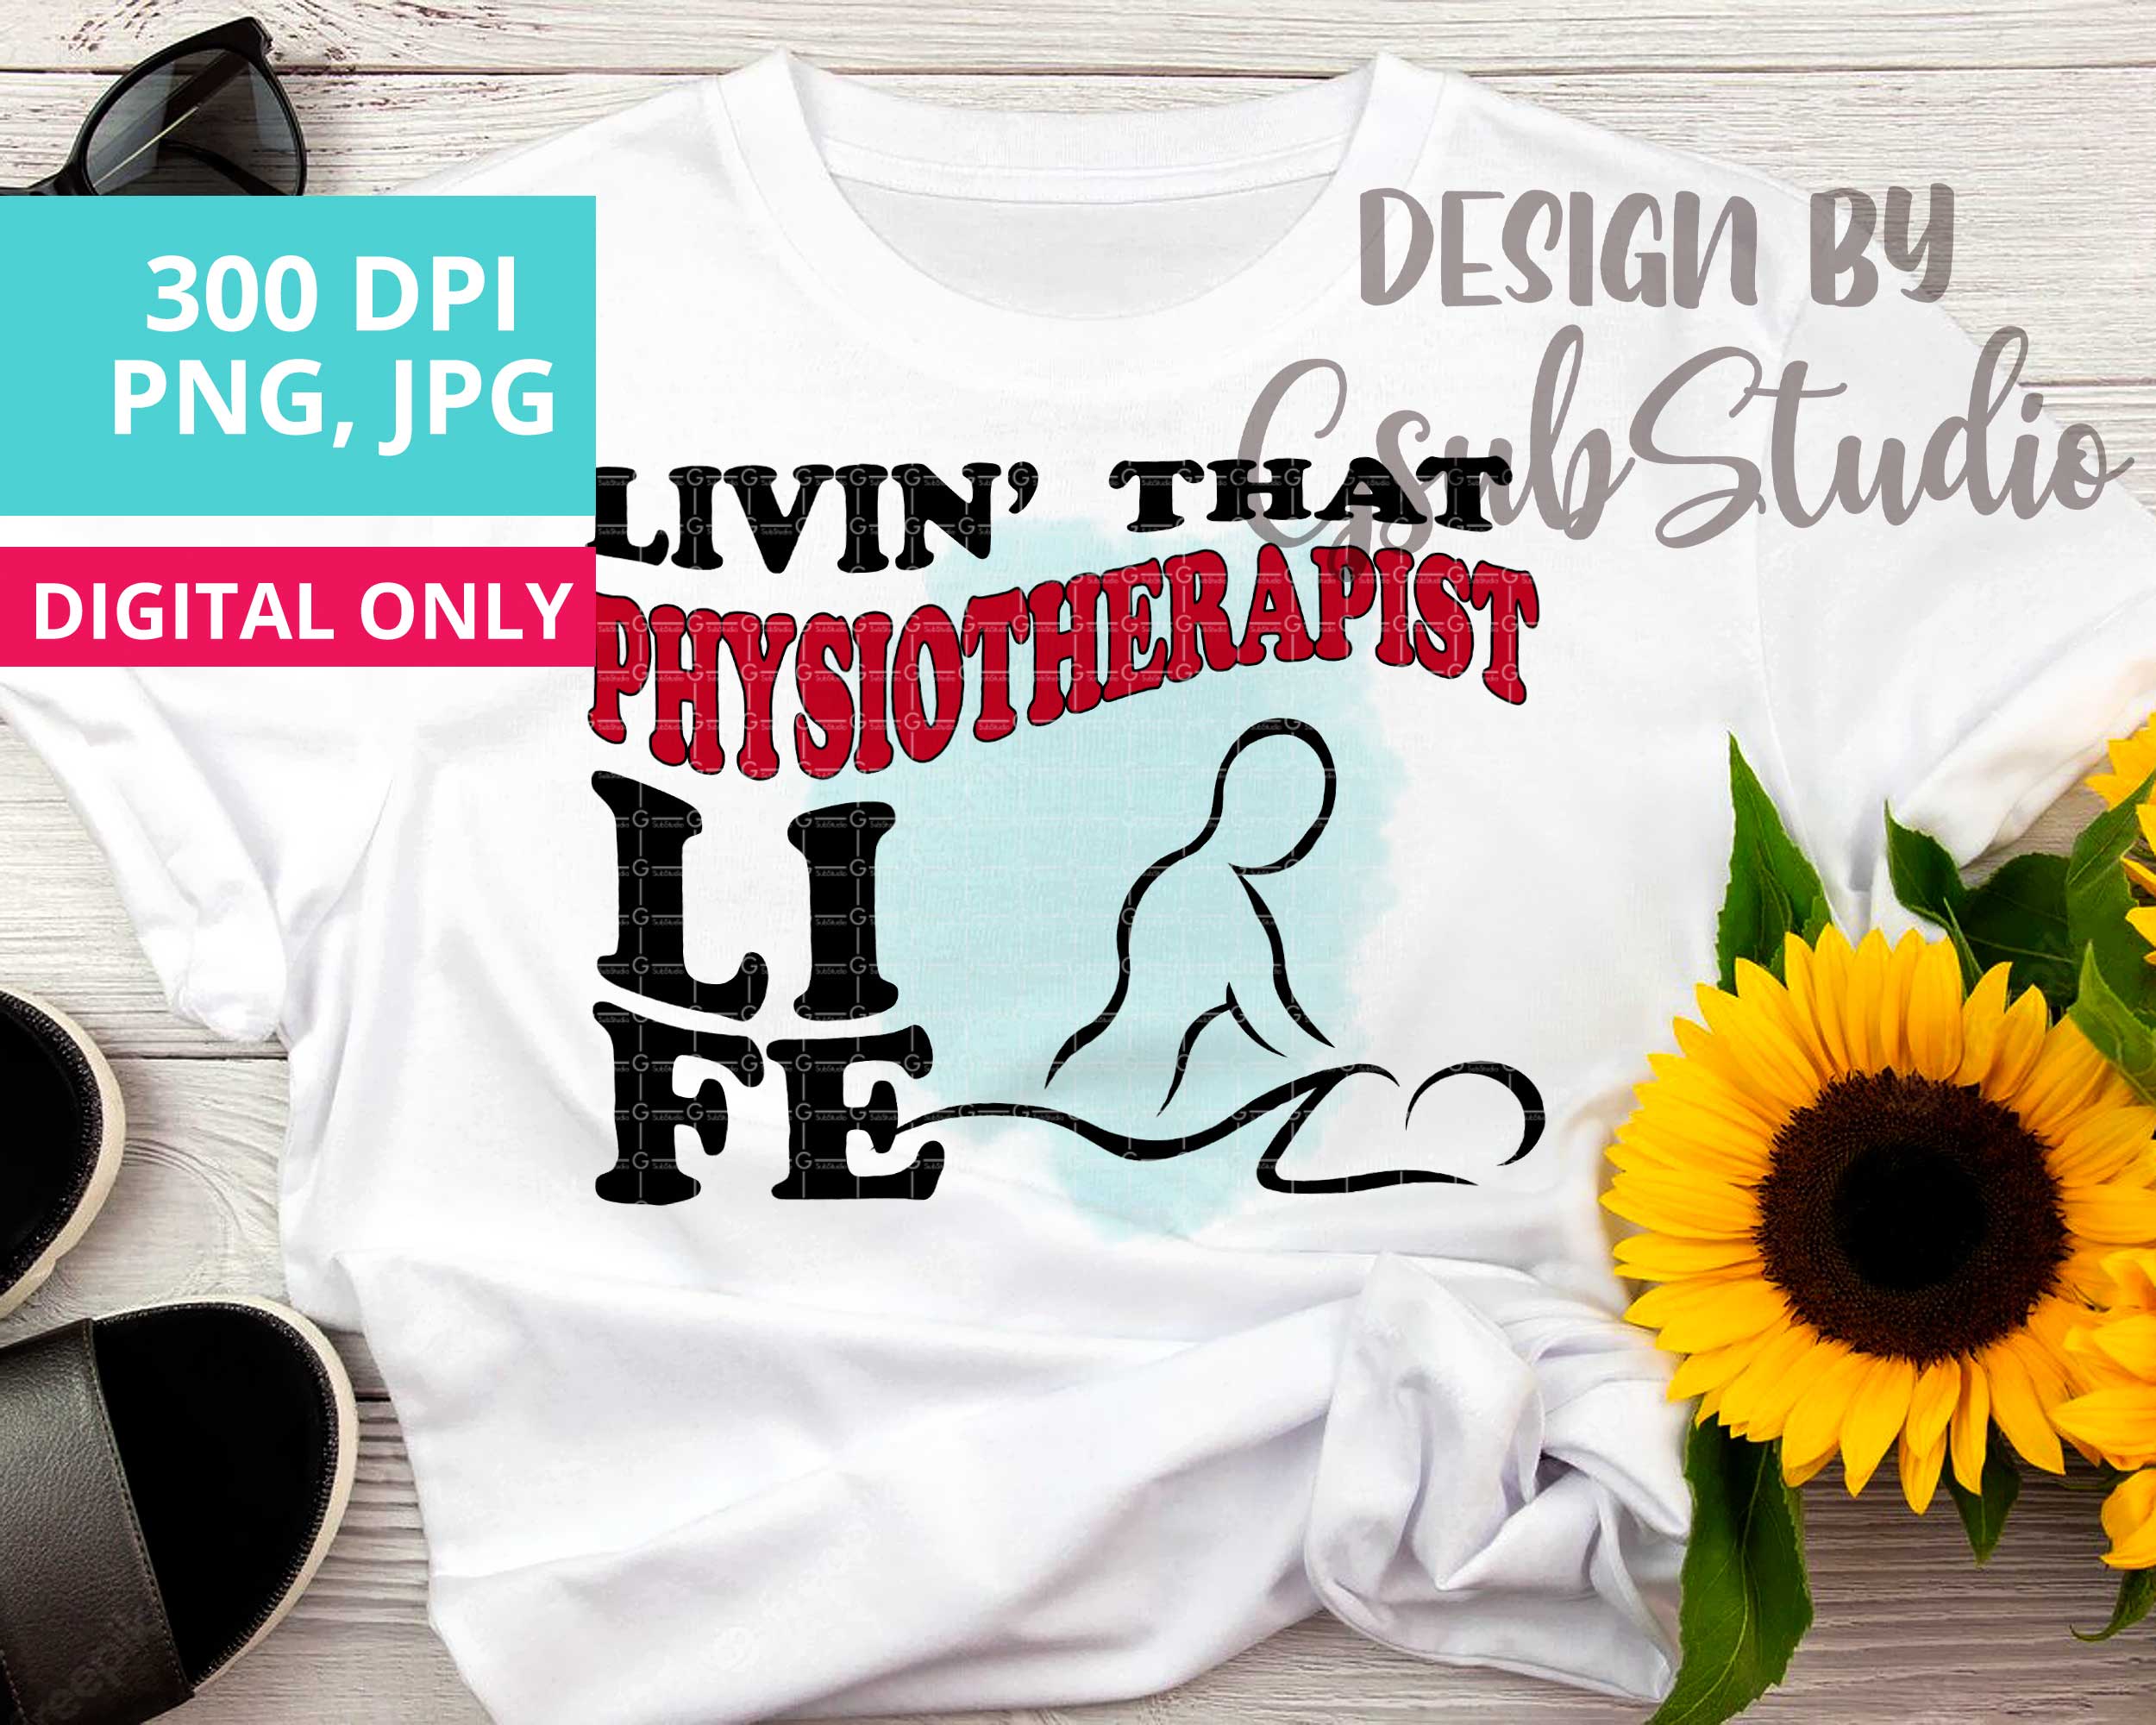 Physiotherapist life PNG sublimation design download, Physiotherapist t-shirt